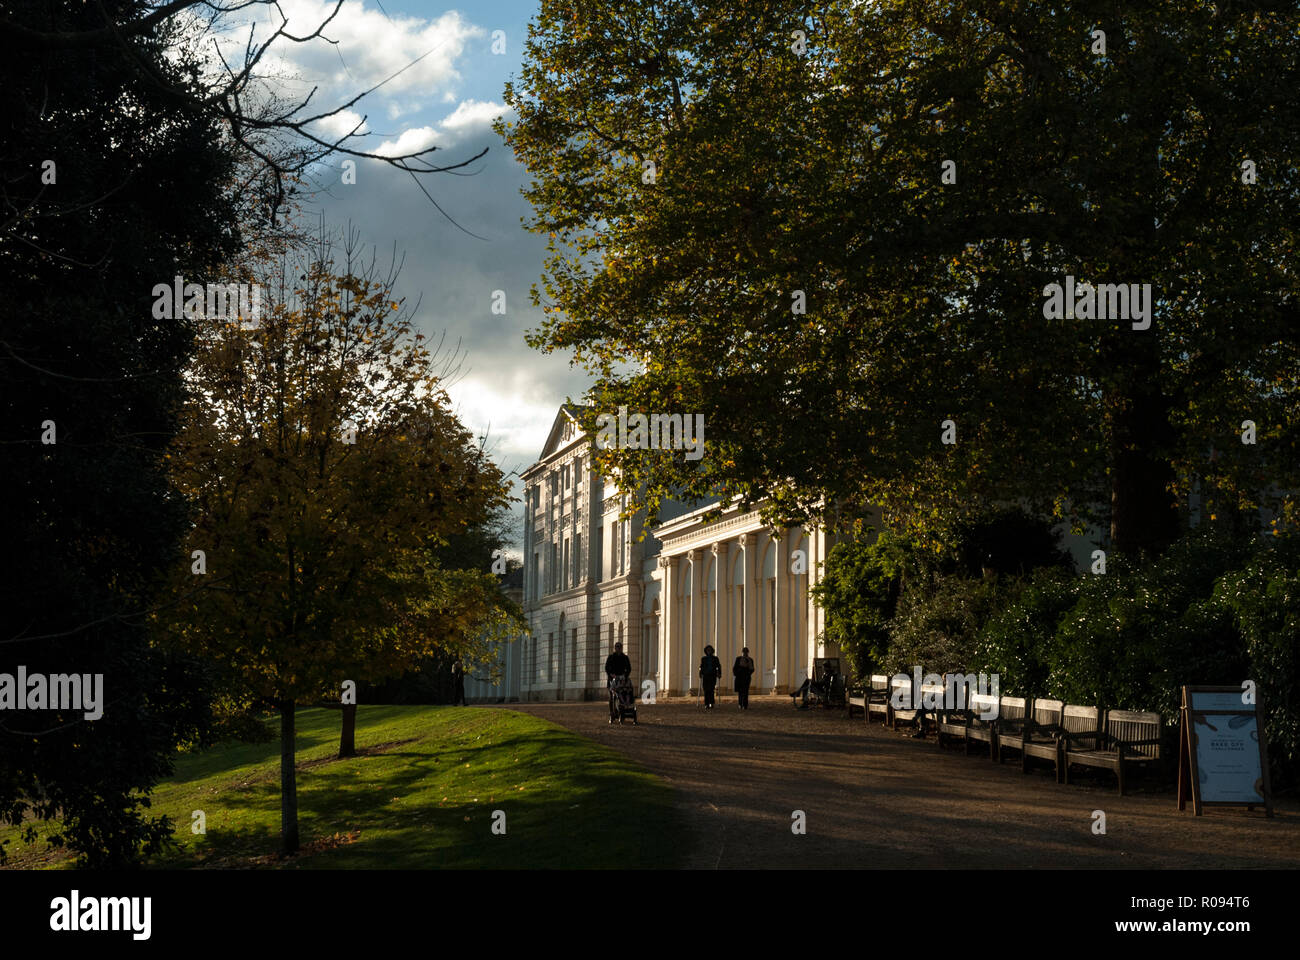 The beautiful Robert Adams facade of Kenwood House on a sunny late afternoon in autumn. Kenwood House, Hampstead, London UK. Stock Photo